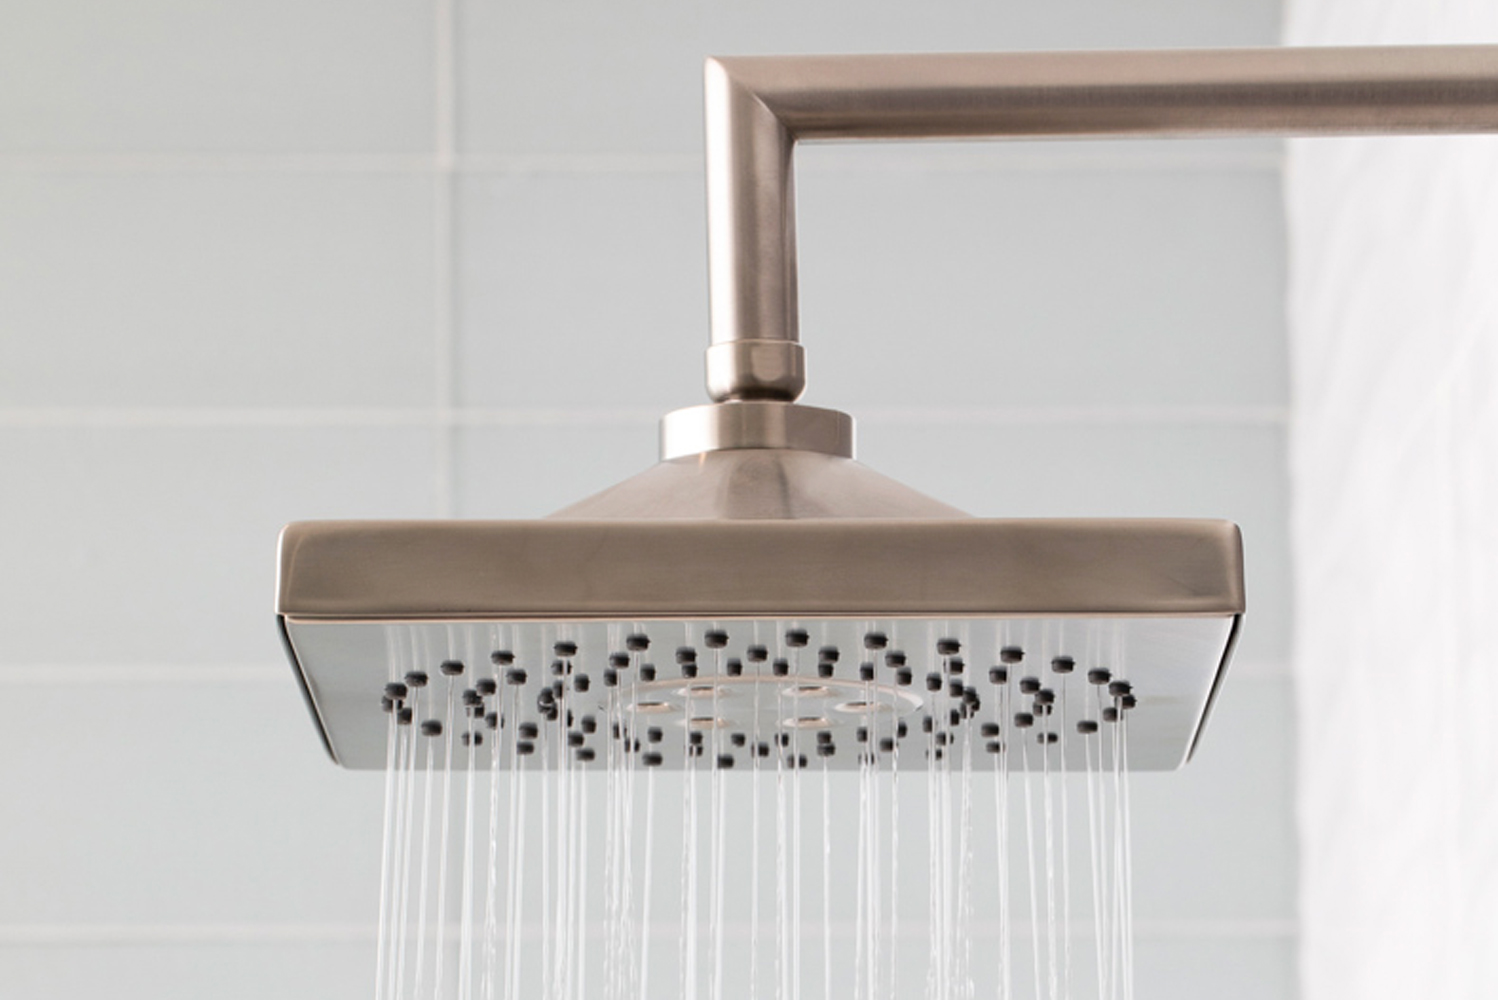 Newport Brass launched a new luxury showerhead to add to its collection of premium faucets and accessories 